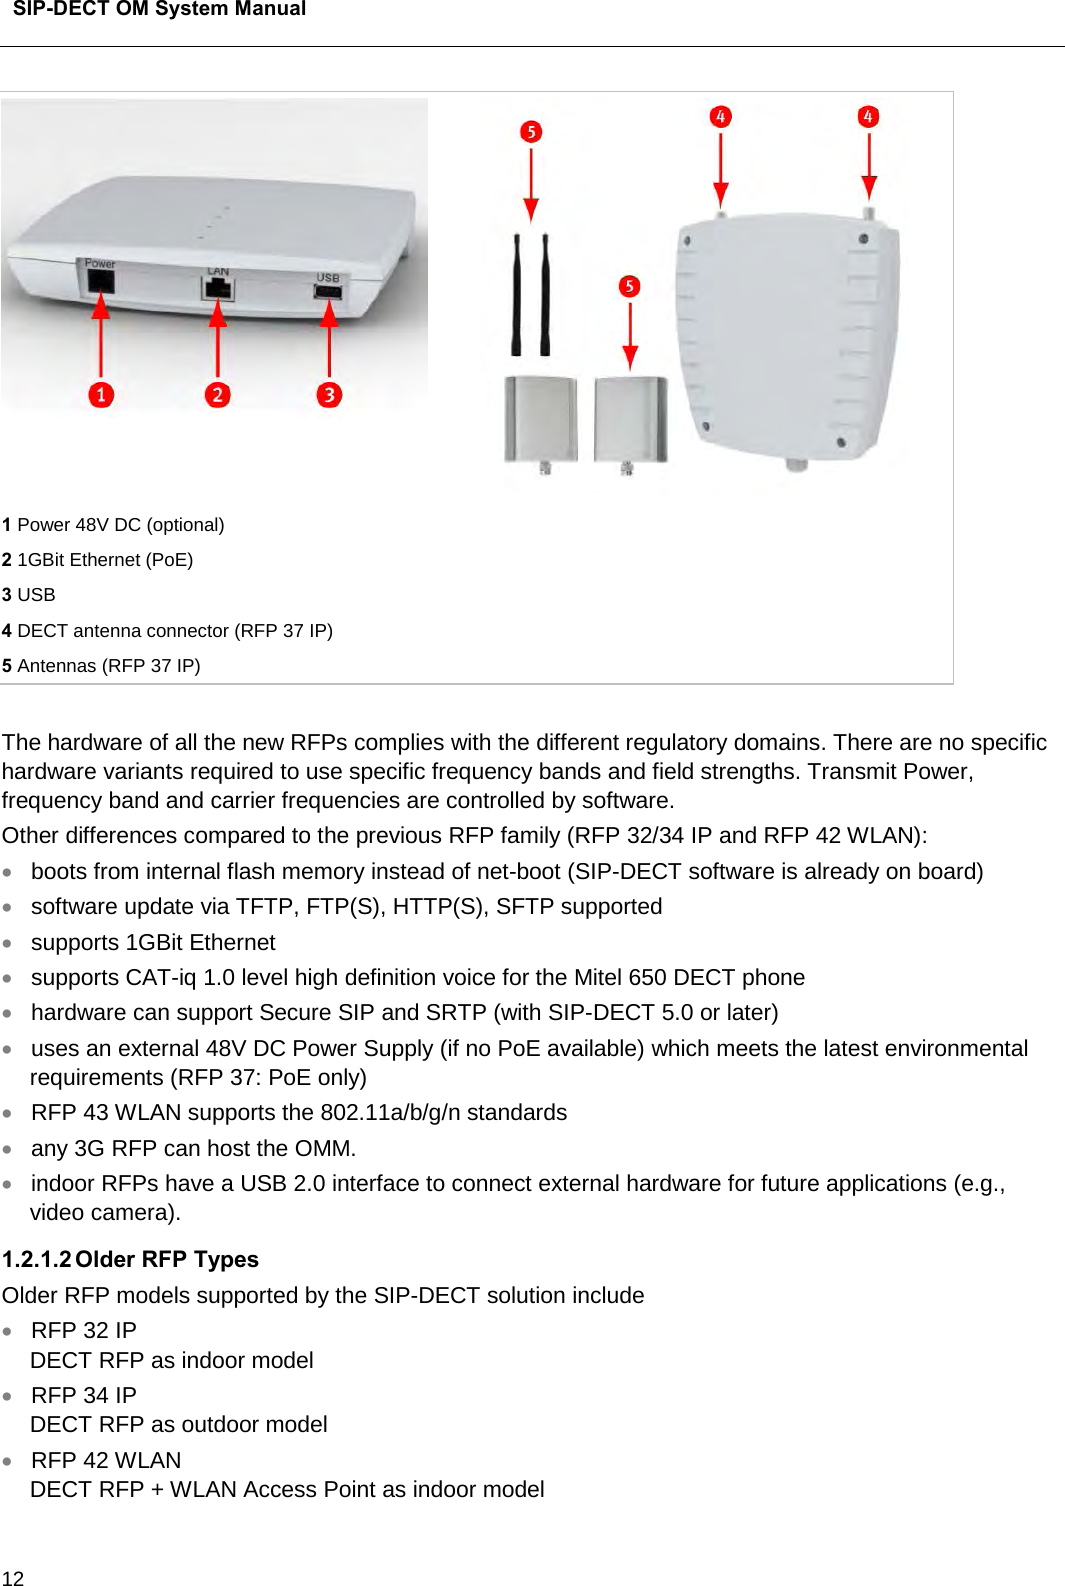  SIP-DECT OM System Manual    12   1 Power 48V DC (optional) 2 1GBit Ethernet (PoE) 3 USB 4 DECT antenna connector (RFP 37 IP) 5 Antennas (RFP 37 IP)  The hardware of all the new RFPs complies with the different regulatory domains. There are no specific hardware variants required to use specific frequency bands and field strengths. Transmit Power, frequency band and carrier frequencies are controlled by software. Other differences compared to the previous RFP family (RFP 32/34 IP and RFP 42 WLAN): • boots from internal flash memory instead of net-boot (SIP-DECT software is already on board) • software update via TFTP, FTP(S), HTTP(S), SFTP supported • supports 1GBit Ethernet • supports CAT-iq 1.0 level high definition voice for the Mitel 650 DECT phone • hardware can support Secure SIP and SRTP (with SIP-DECT 5.0 or later) • uses an external 48V DC Power Supply (if no PoE available) which meets the latest environmental requirements (RFP 37: PoE only) • RFP 43 WLAN supports the 802.11a/b/g/n standards • any 3G RFP can host the OMM.  • indoor RFPs have a USB 2.0 interface to connect external hardware for future applications (e.g., video camera). 1.2.1.2 Older RFP Types Older RFP models supported by the SIP-DECT solution include • RFP 32 IP  DECT RFP as indoor model  • RFP 34 IP DECT RFP as outdoor model  • RFP 42 WLAN  DECT RFP + WLAN Access Point as indoor model  